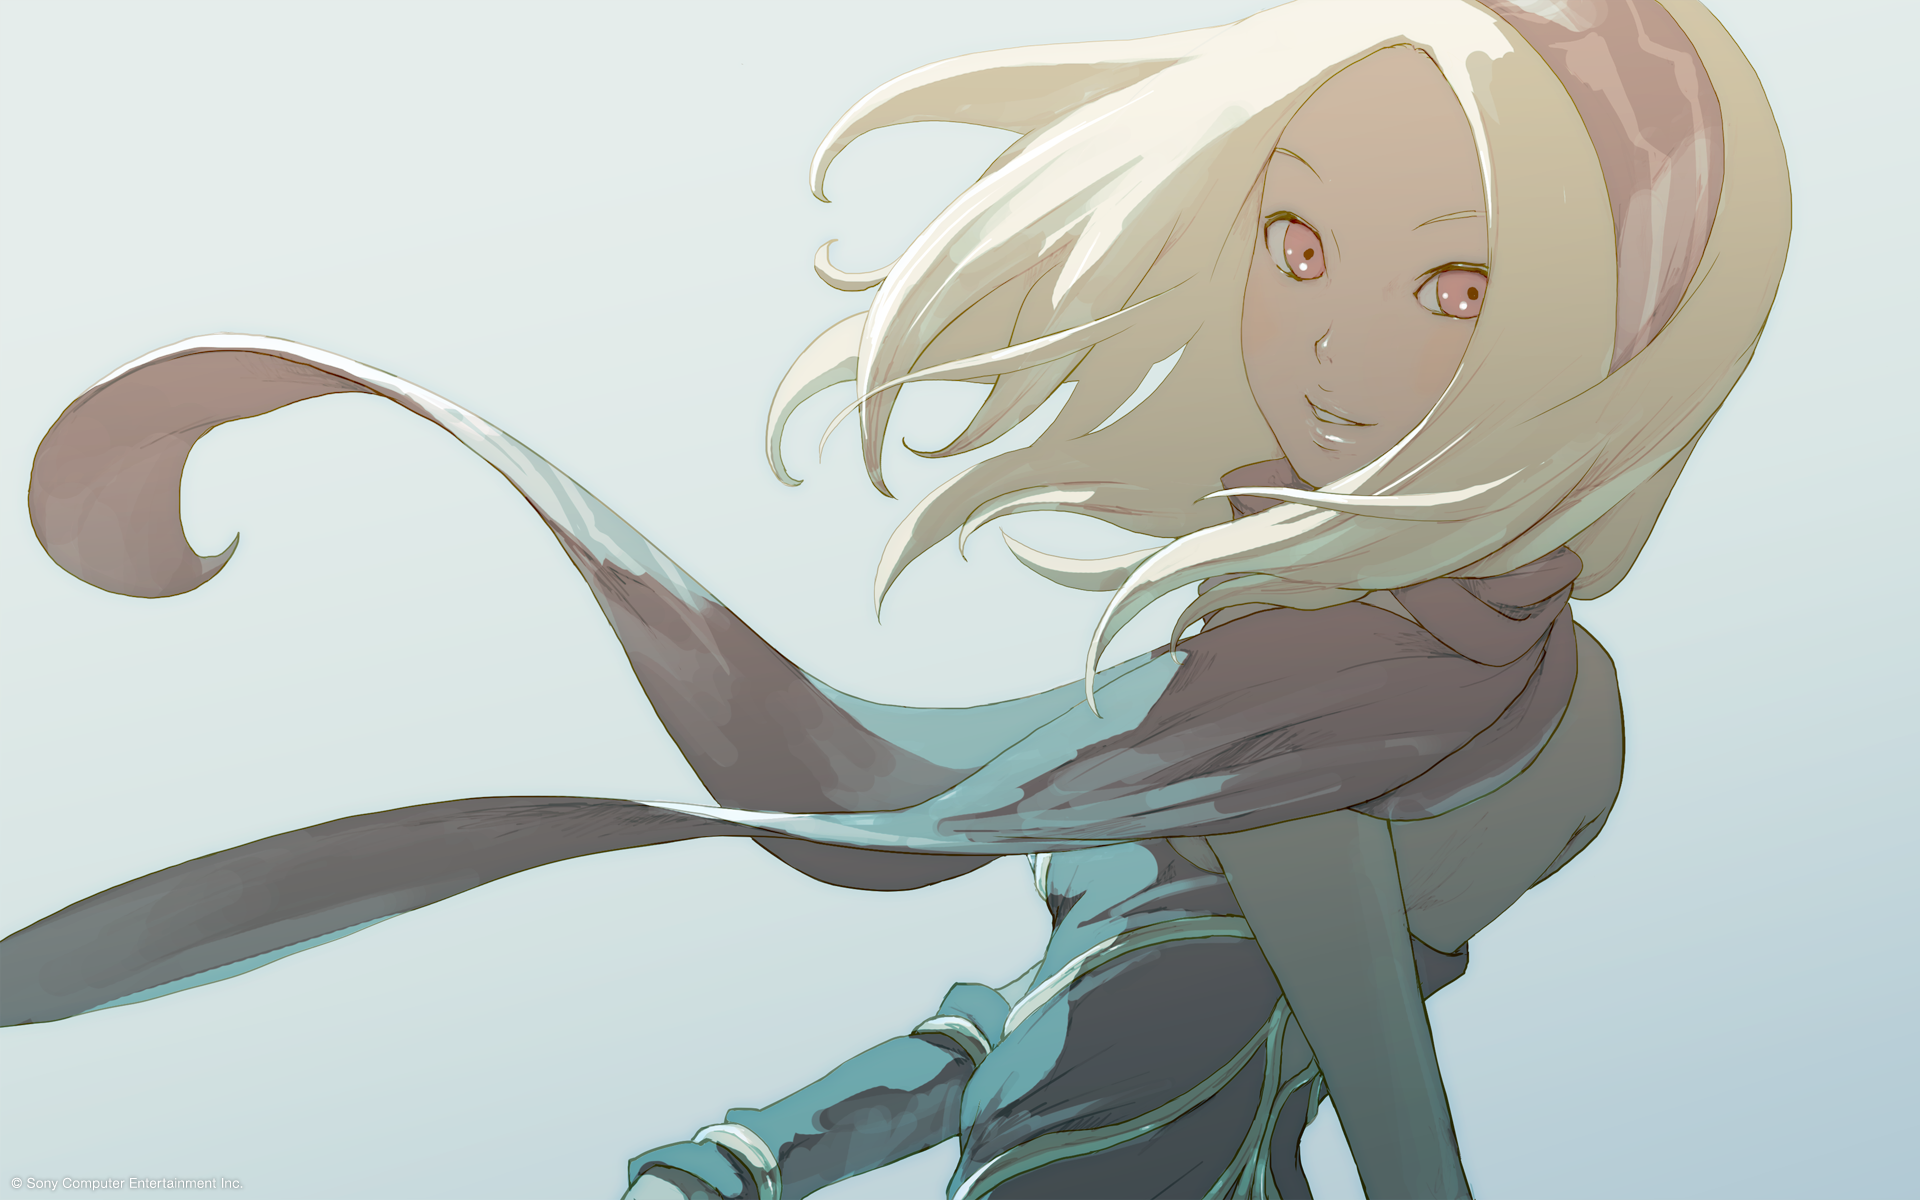 TGS 2013: New Gravity Rush Video Teases New Game Together With